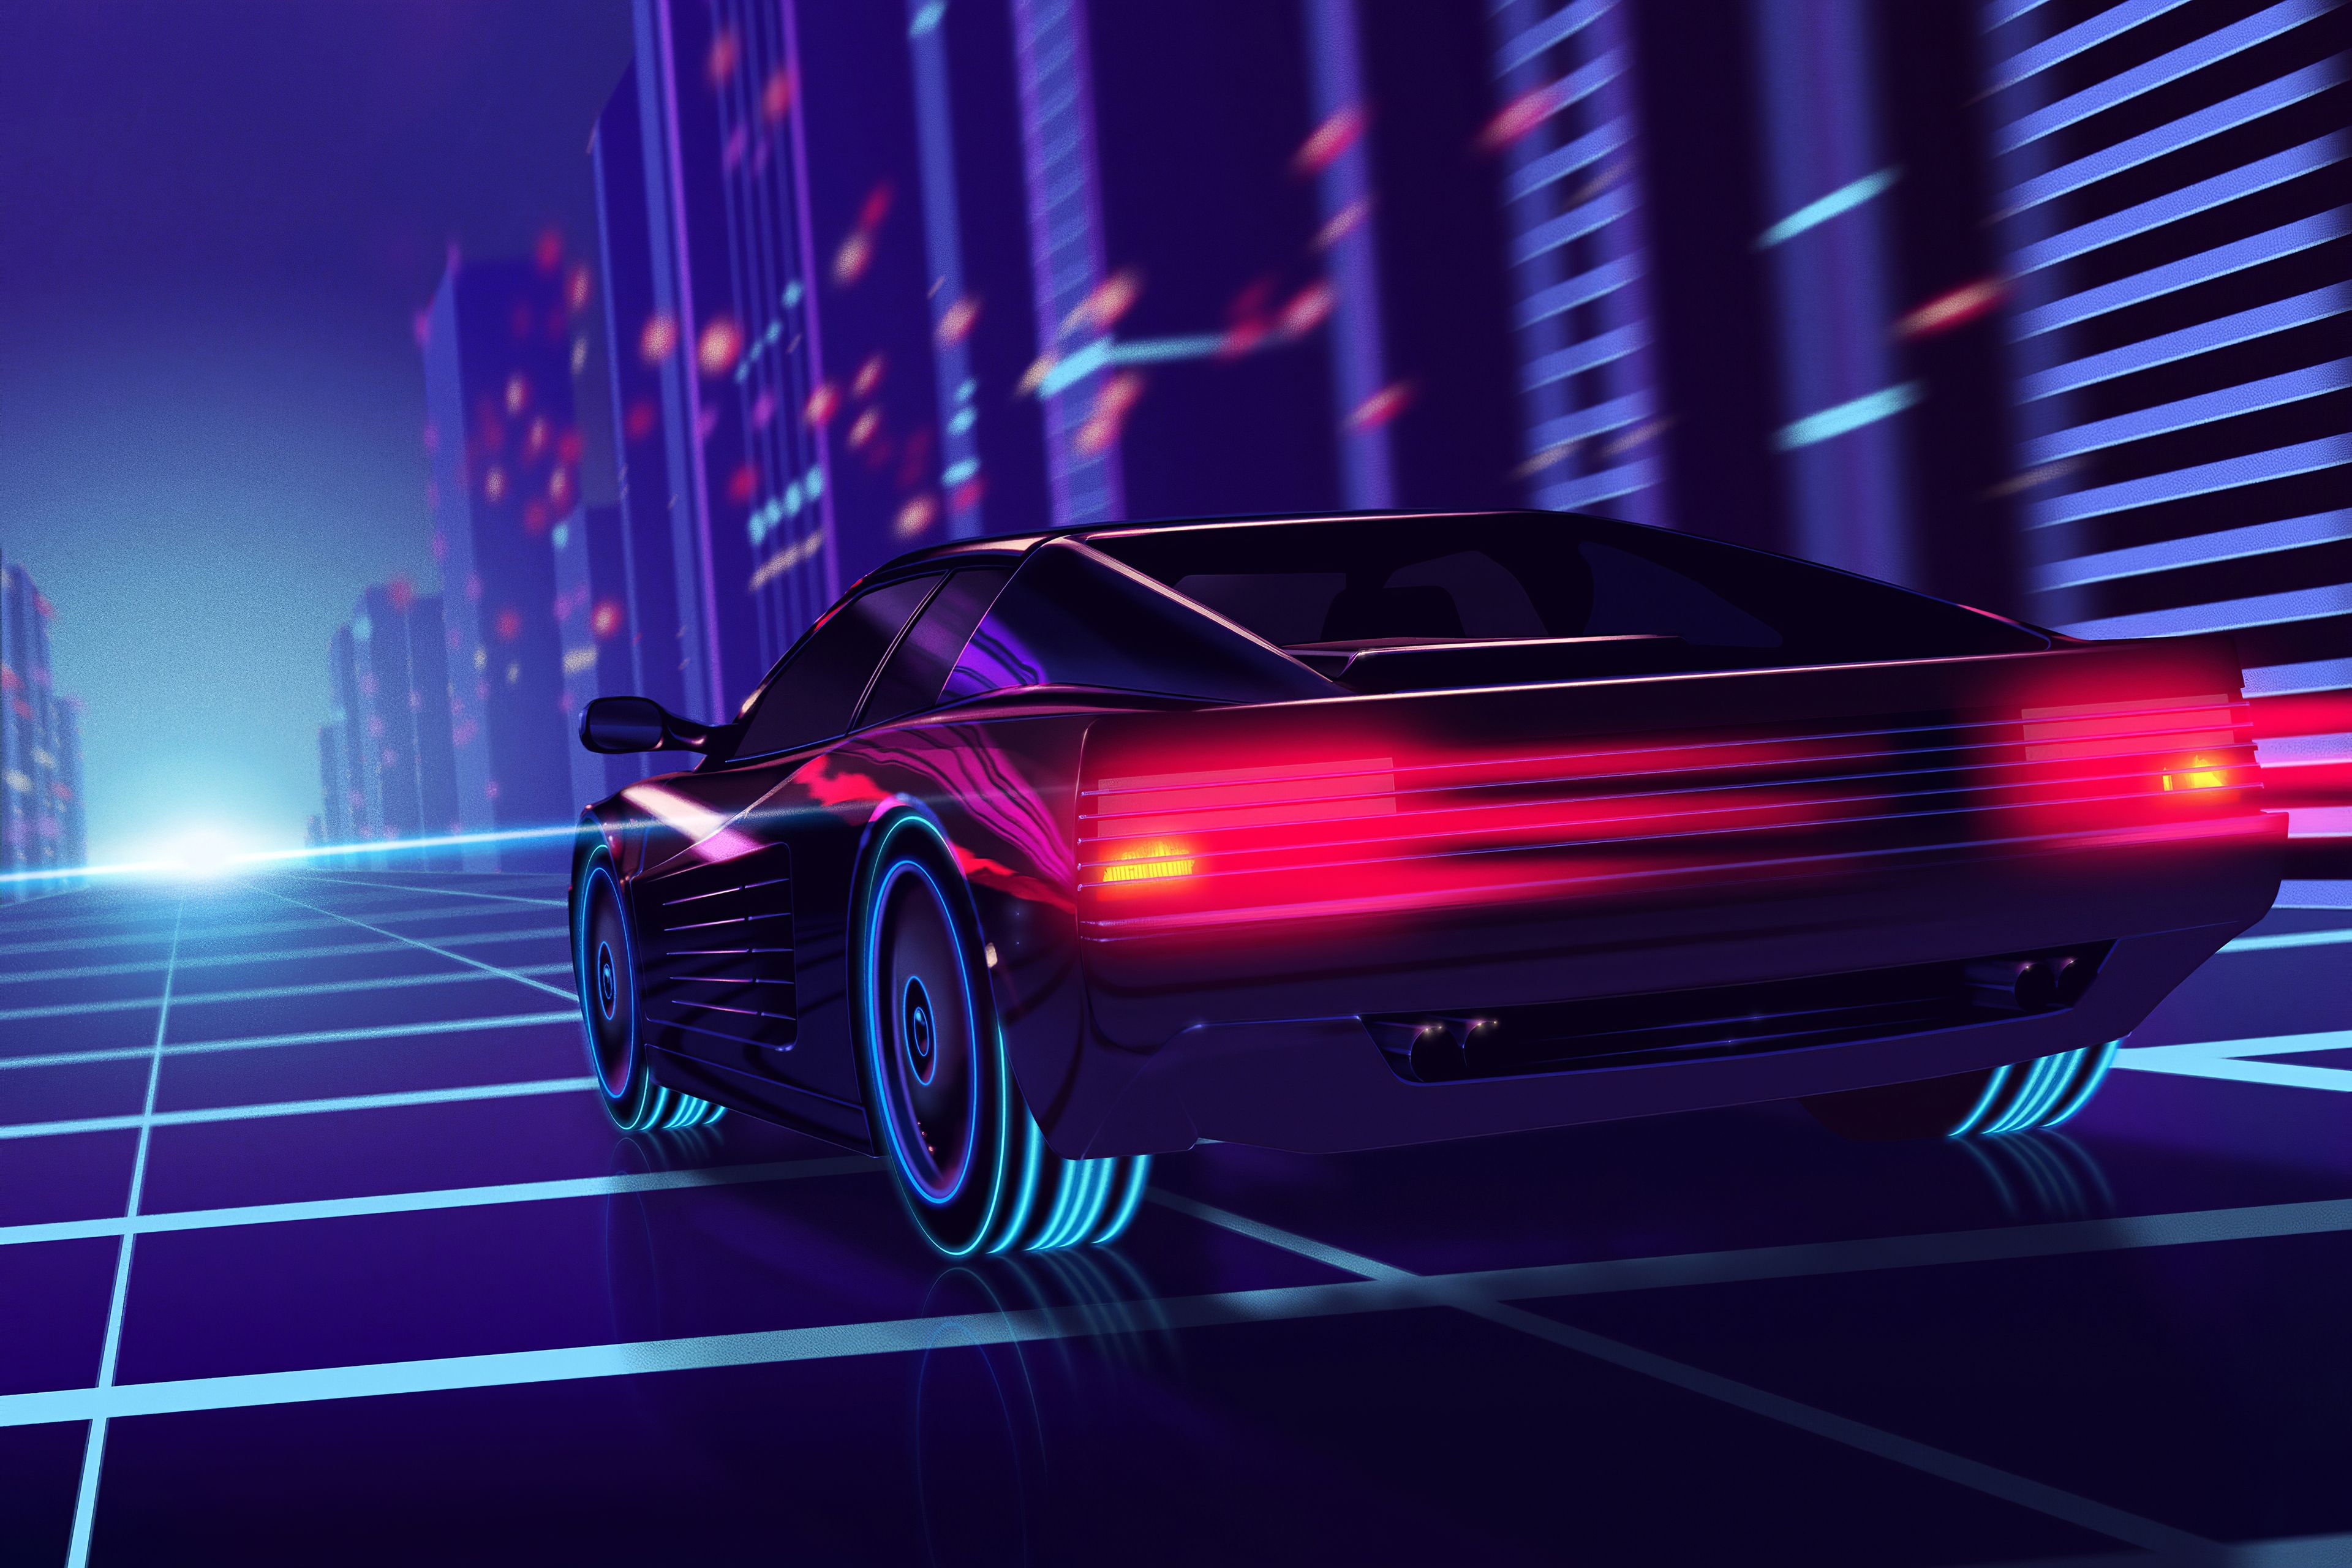 Wallpaper Synthwave, RetroWave art, Neon, Racing car, Night, 4K, Creative Graphics / Editor's Picks,. Wallpaper for iPhone, Android, Mobile and Desktop